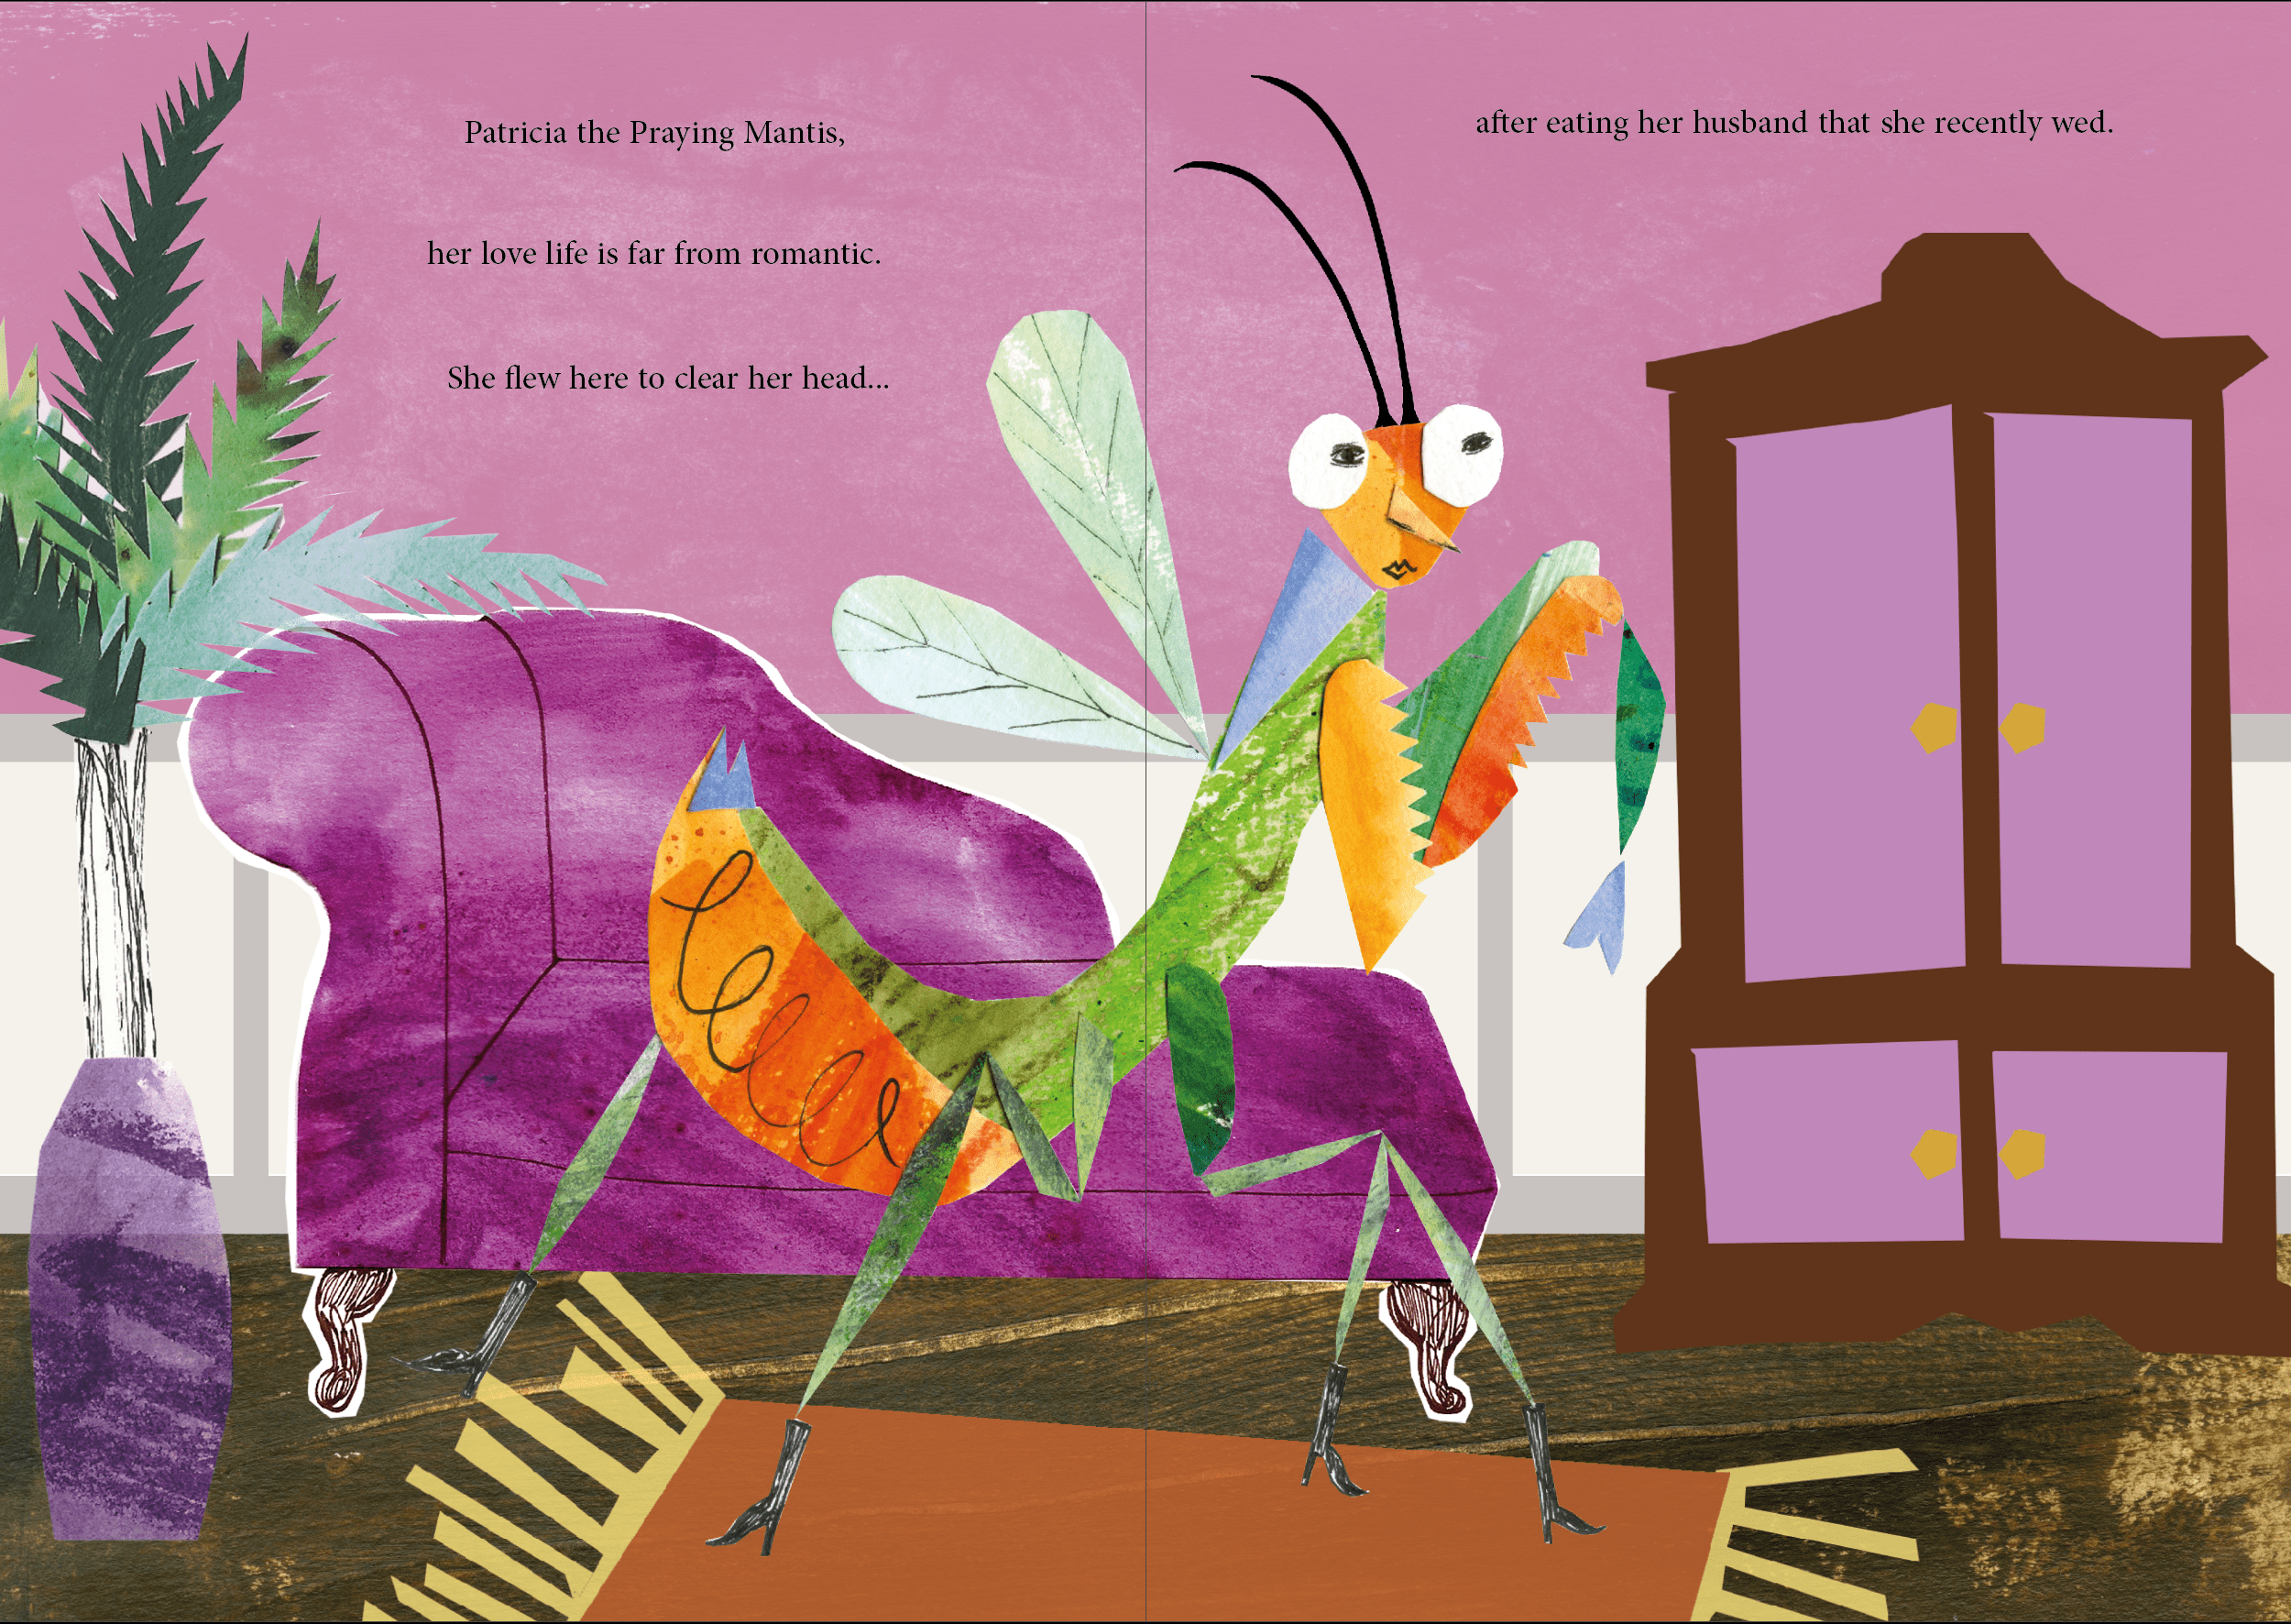 Double page spread from The Hive Hotel Book, showing a collage praying mantis inside a pink hotel room